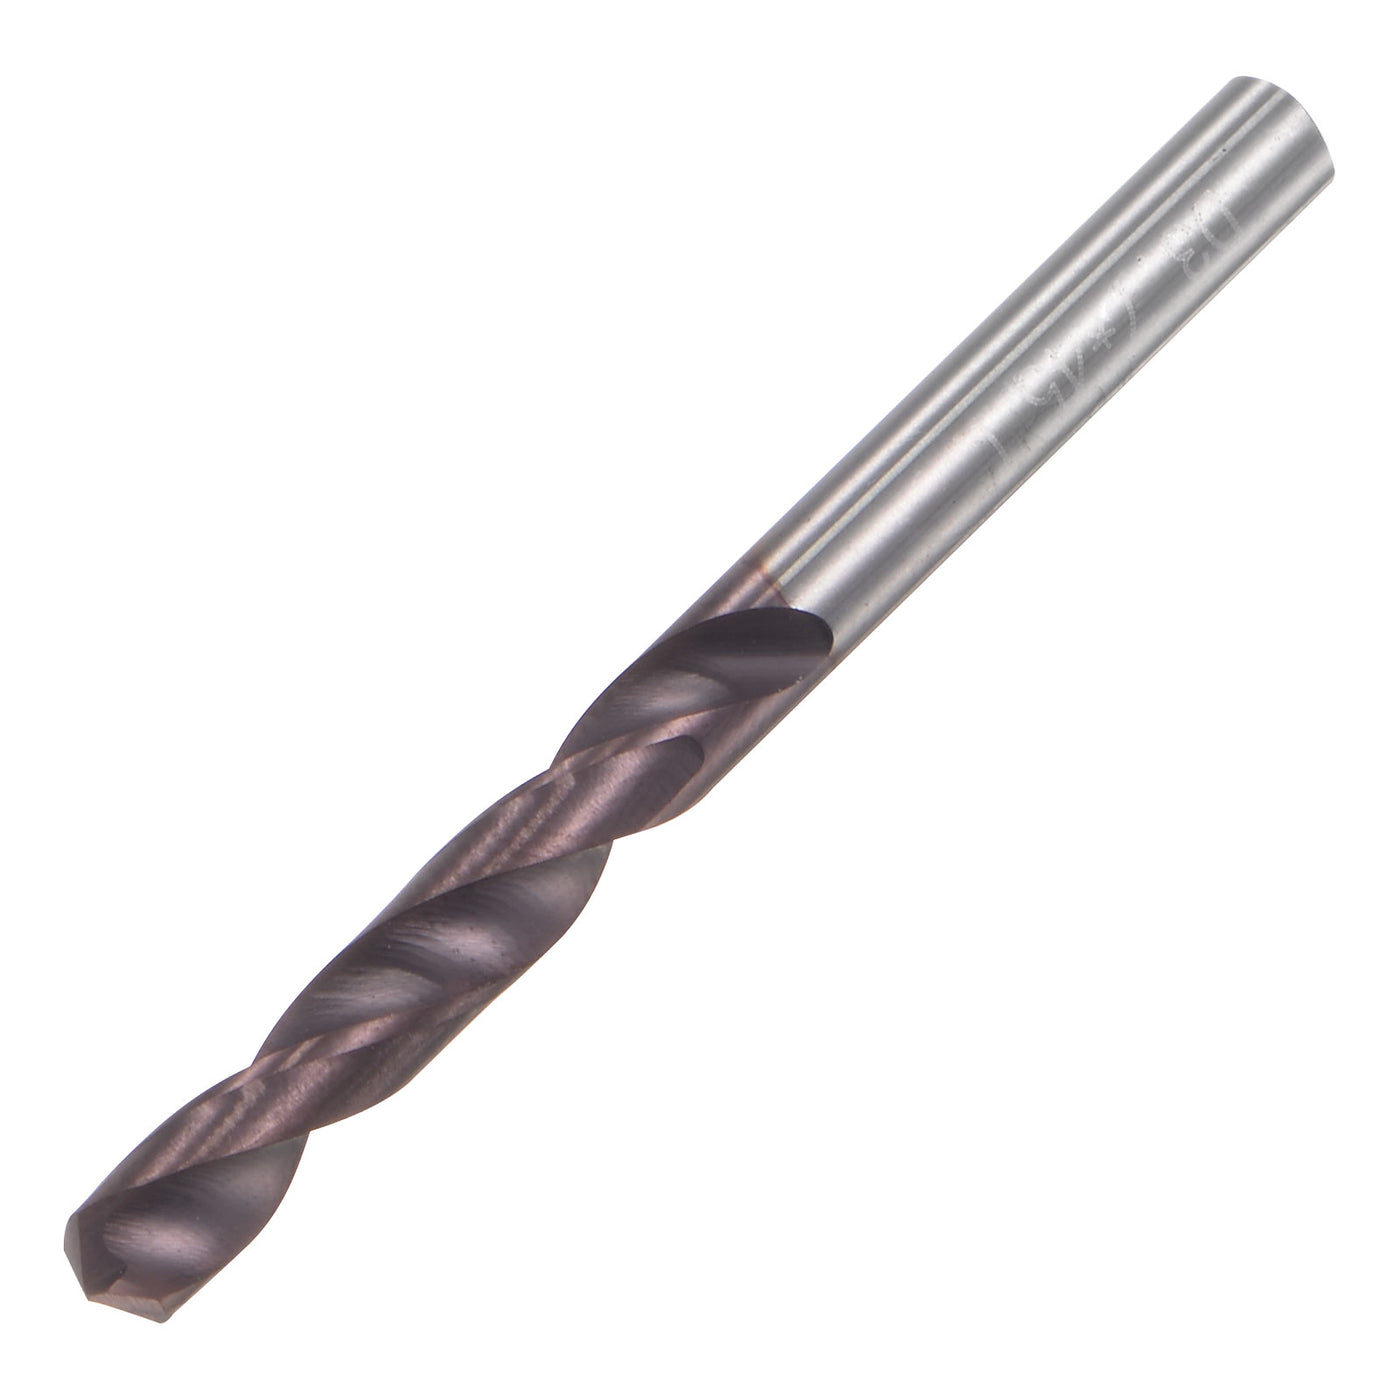 uxcell Uxcell 3.7mm DIN K45 Tungsten Carbide AlTiSin Coated Drill Bit for Stainless Steel